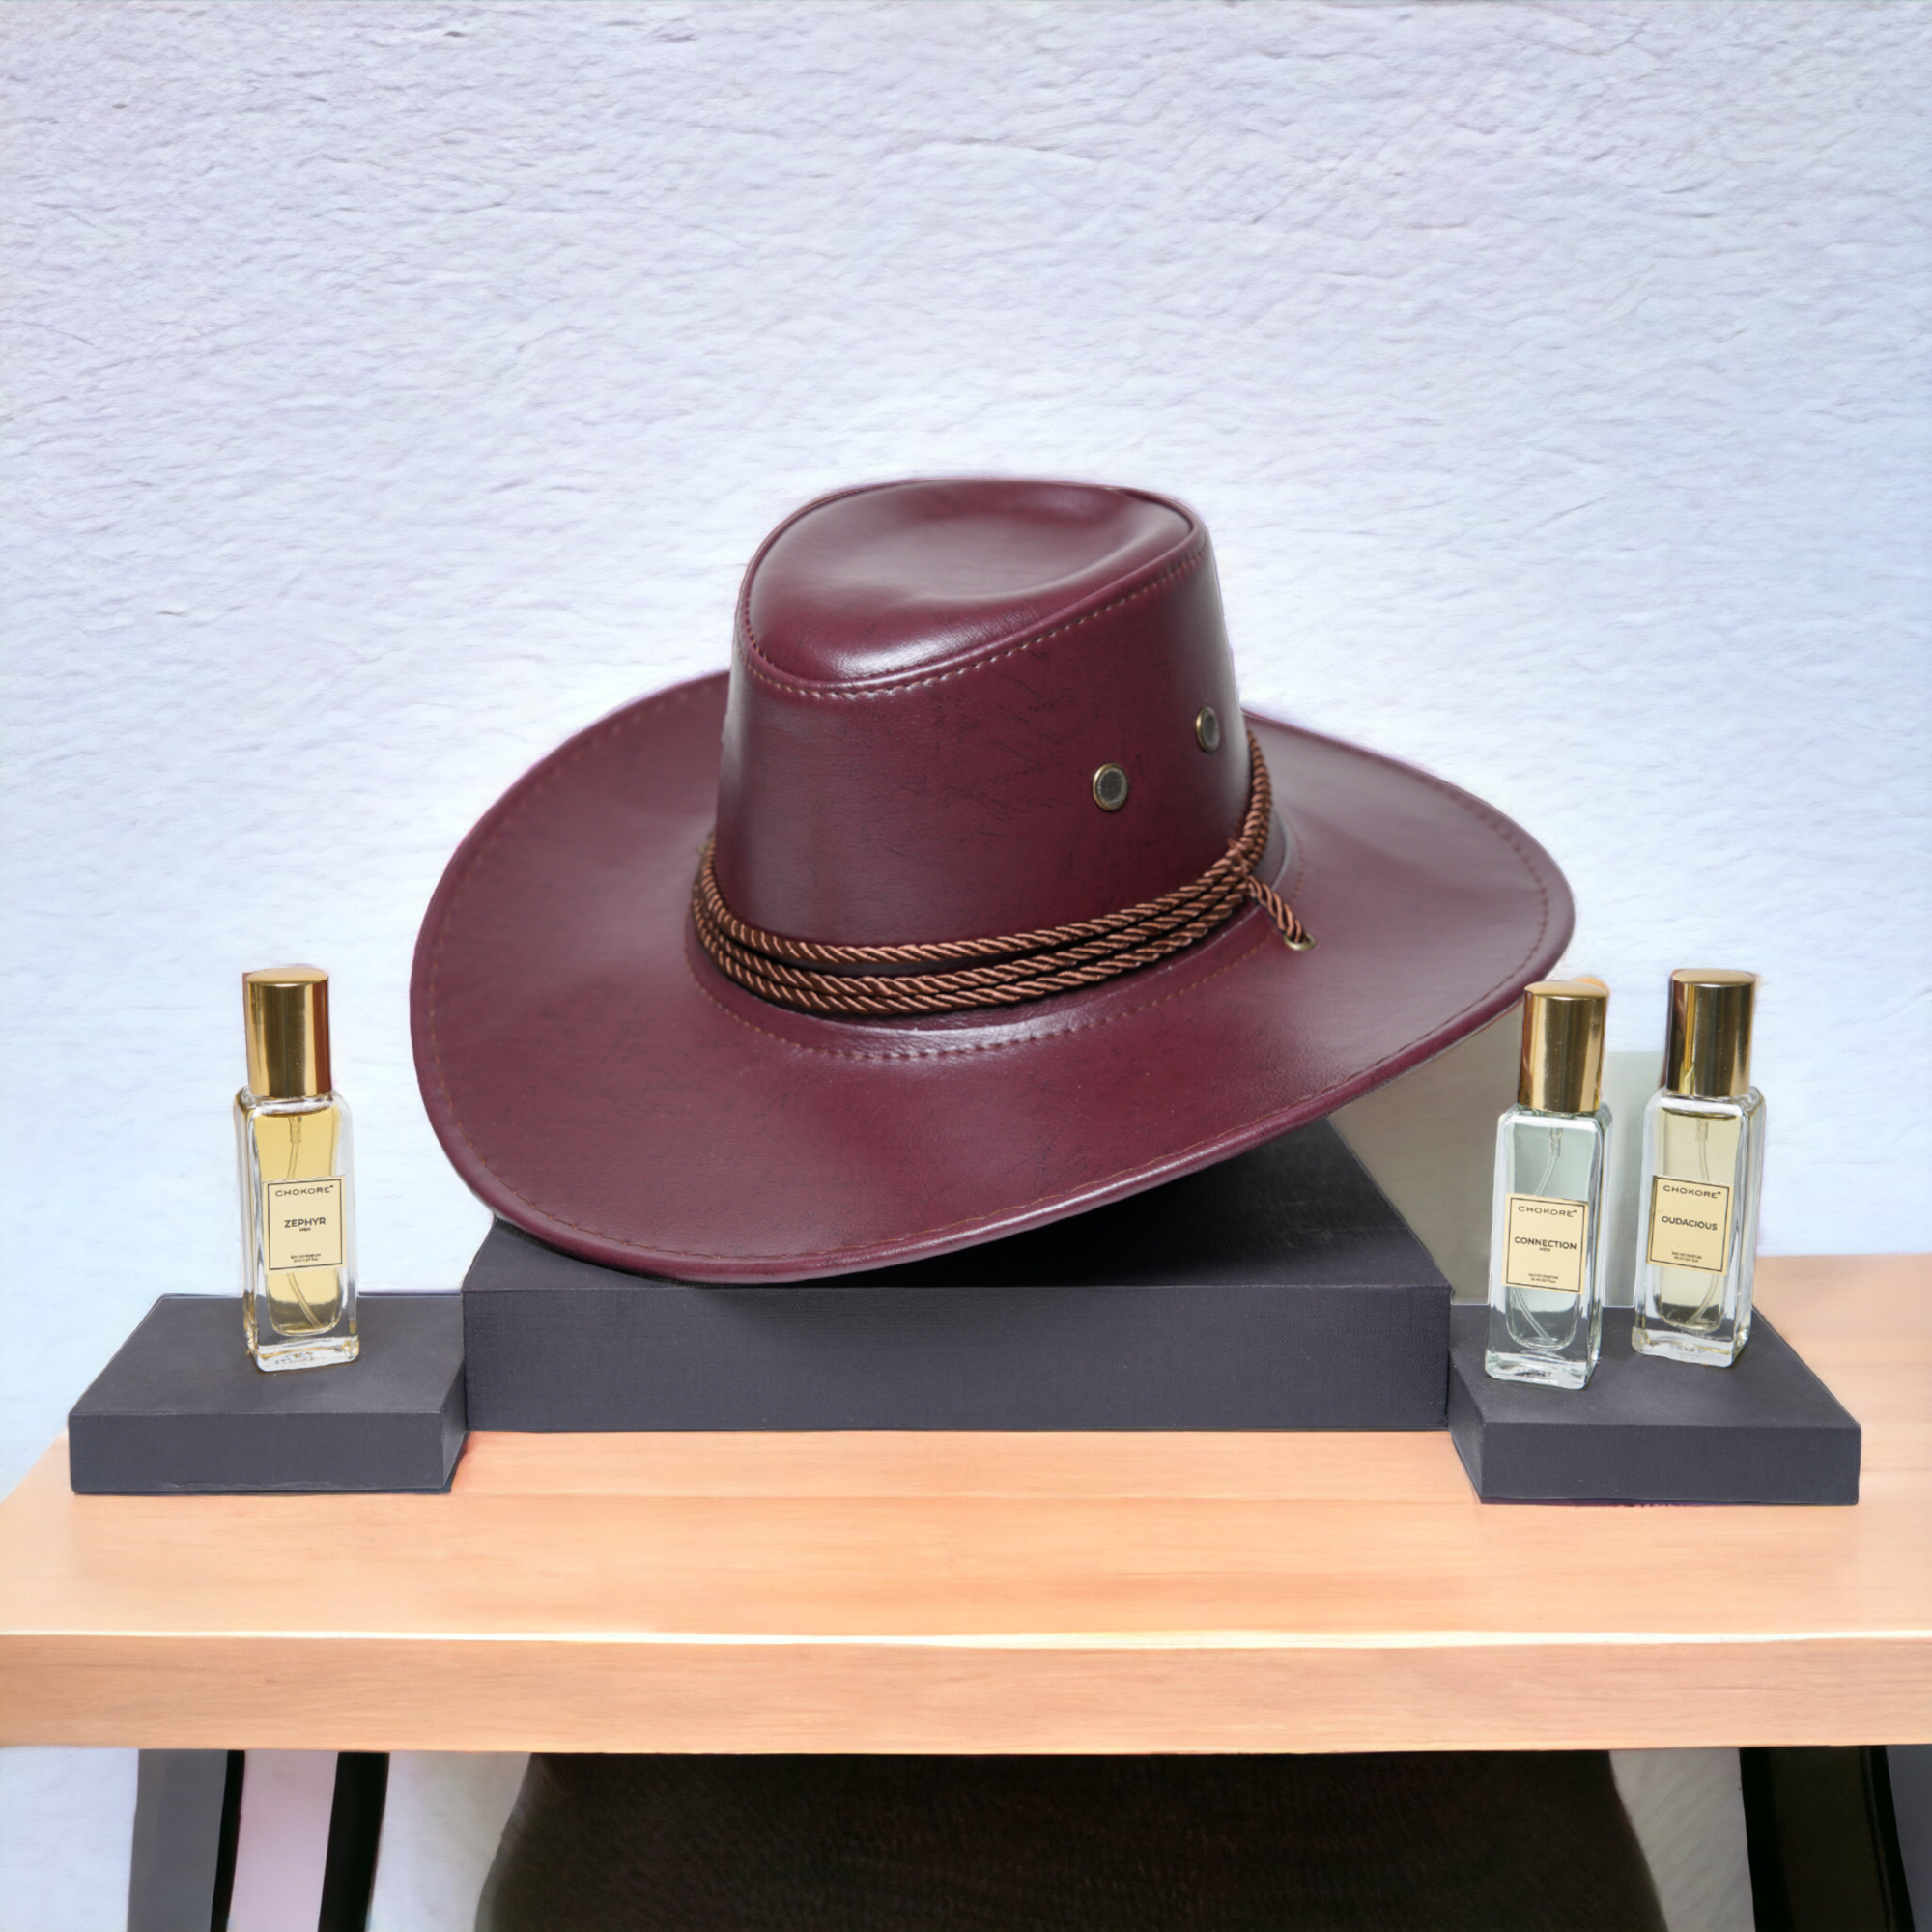 "Chokore Special 2-in-1 Gift Set for Him (Leather Cowboy Hat, & Perfumes Combo)  "